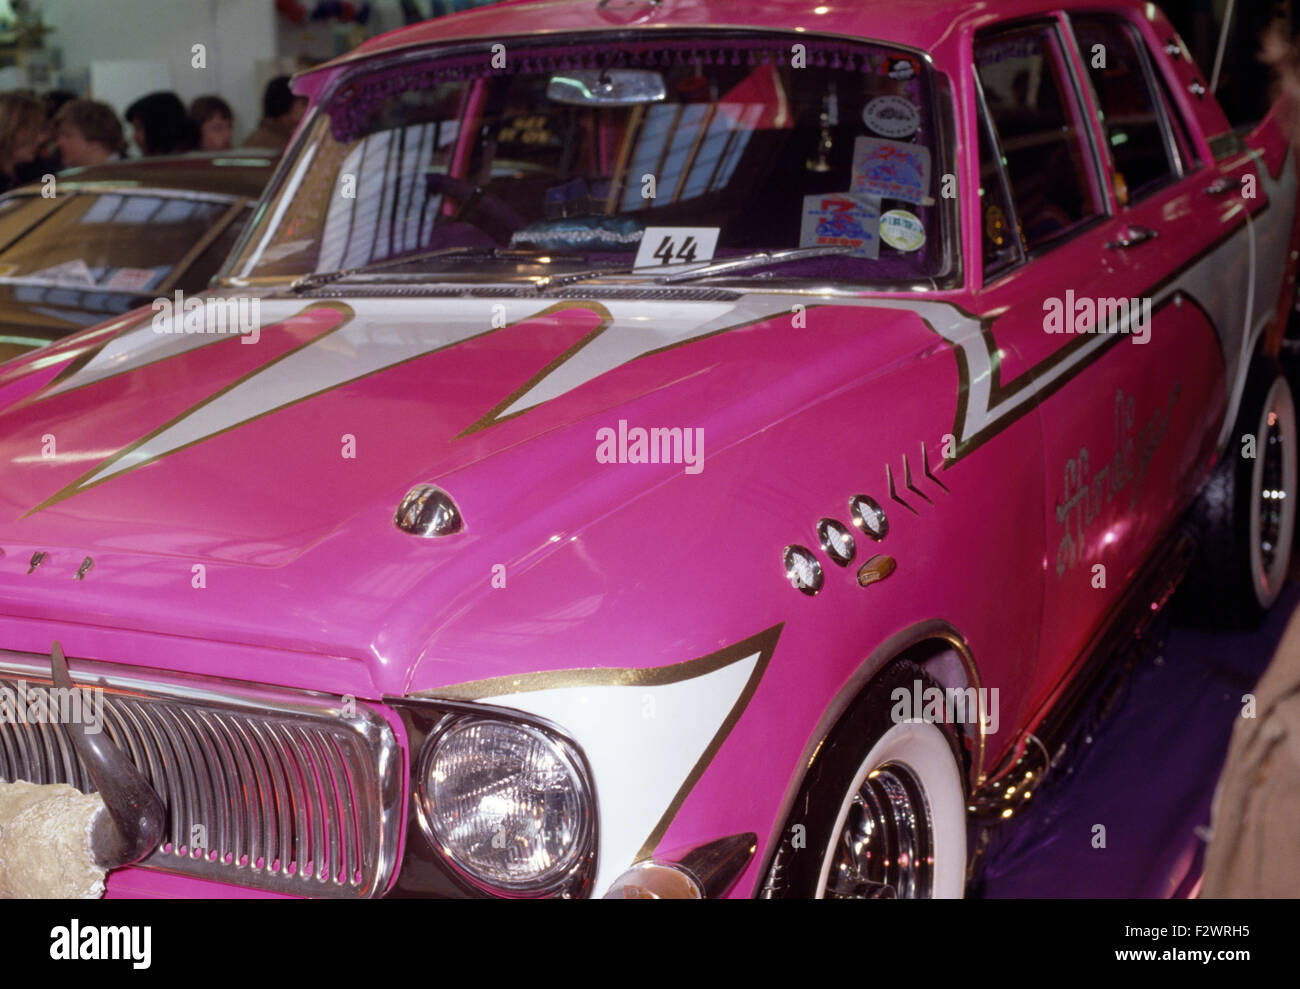 Bright pink customised fifties car Stock Photo